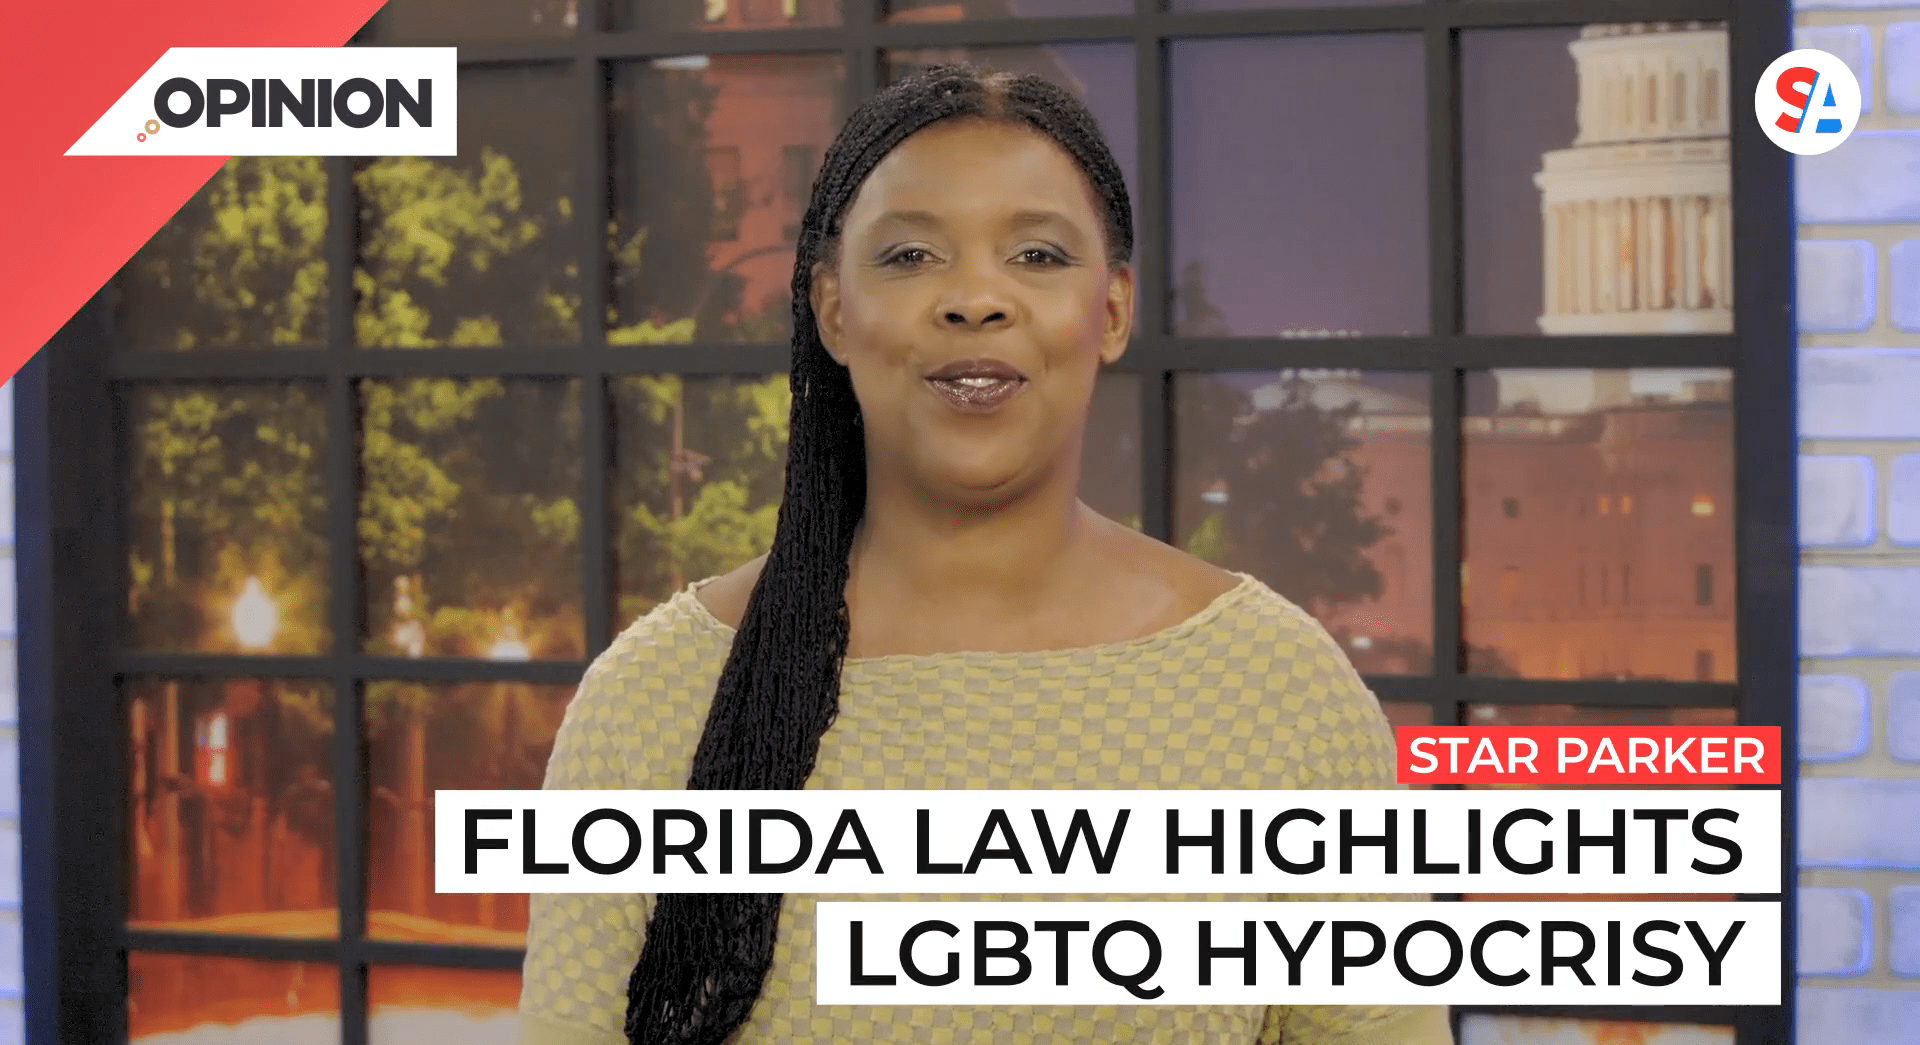 Florida's so-called "Don't Say Gay" bill is only about giving parents a say in their kids' education, despite what LGBTQ activists claim.